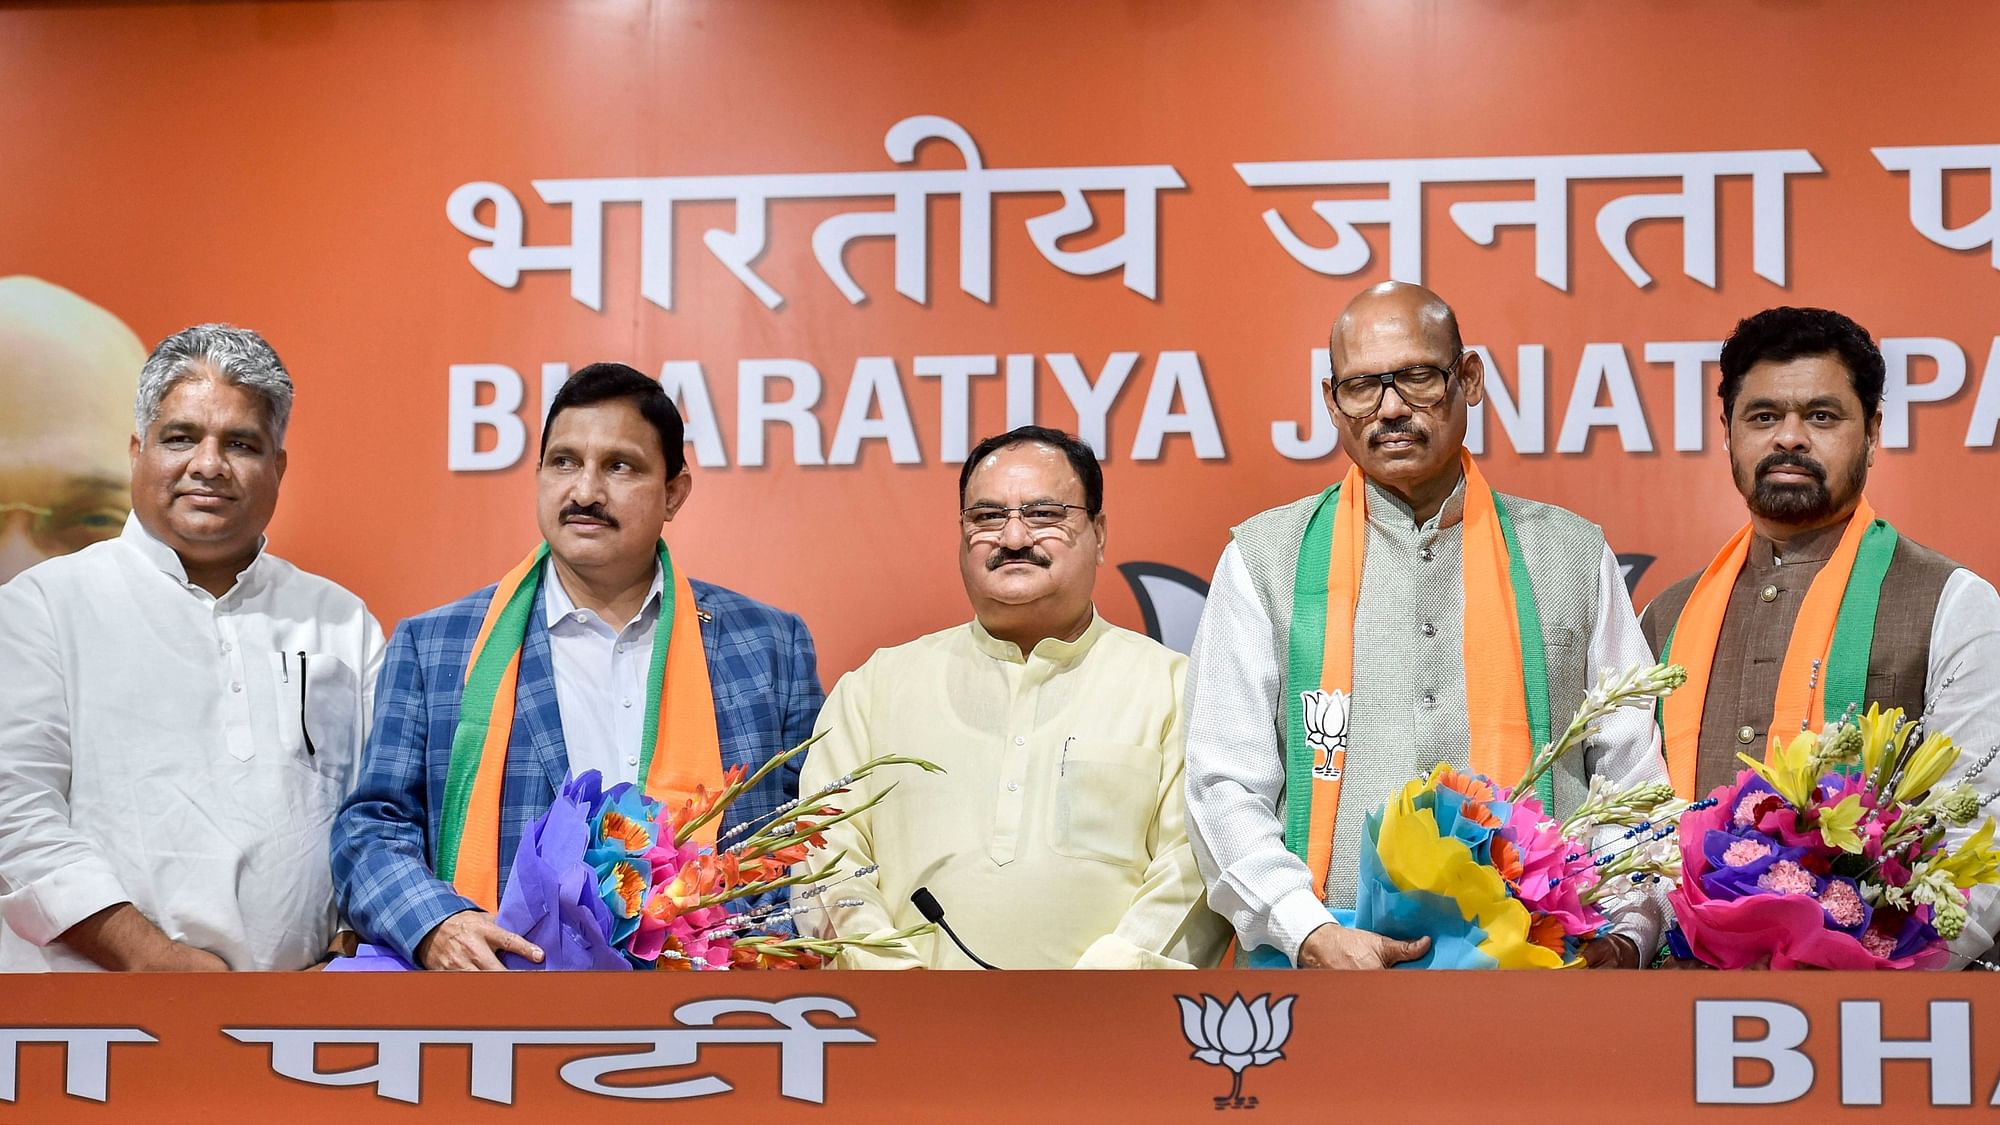 TDP Rajya Sabha MPs YS Chowdary, TG Venkatesh and CM Ramesh join BJP in the presence of party’s Working President JP Nadda in New Delhi, on Thursday, 20 June.